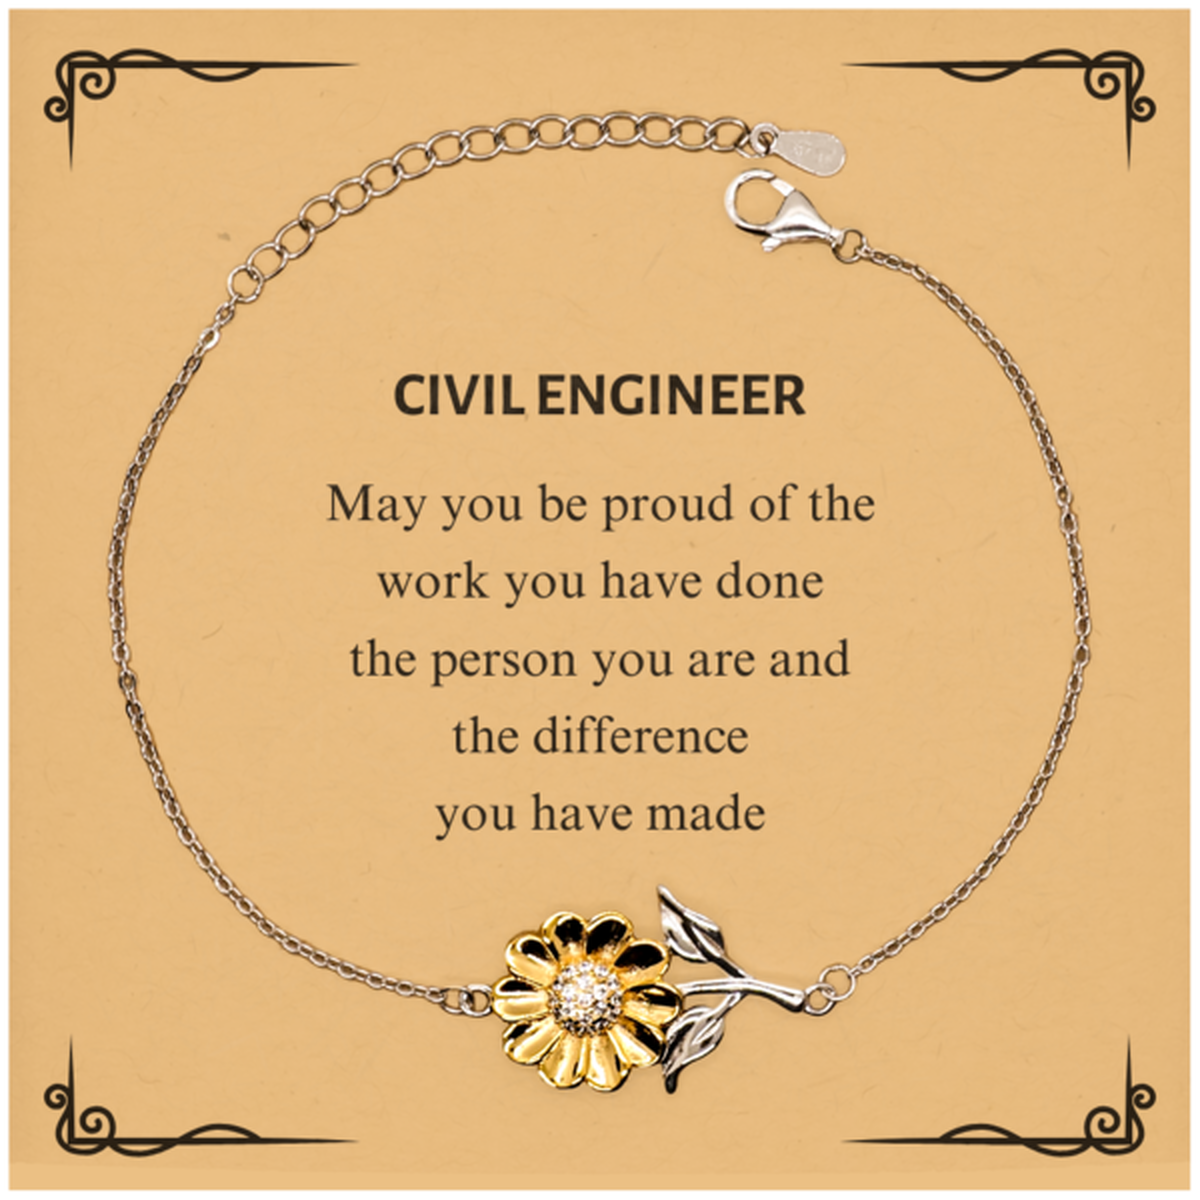 Civil Engineer May you be proud of the work you have done, Retirement Civil Engineer Sunflower Bracelet for Colleague Appreciation Gifts Amazing for Civil Engineer